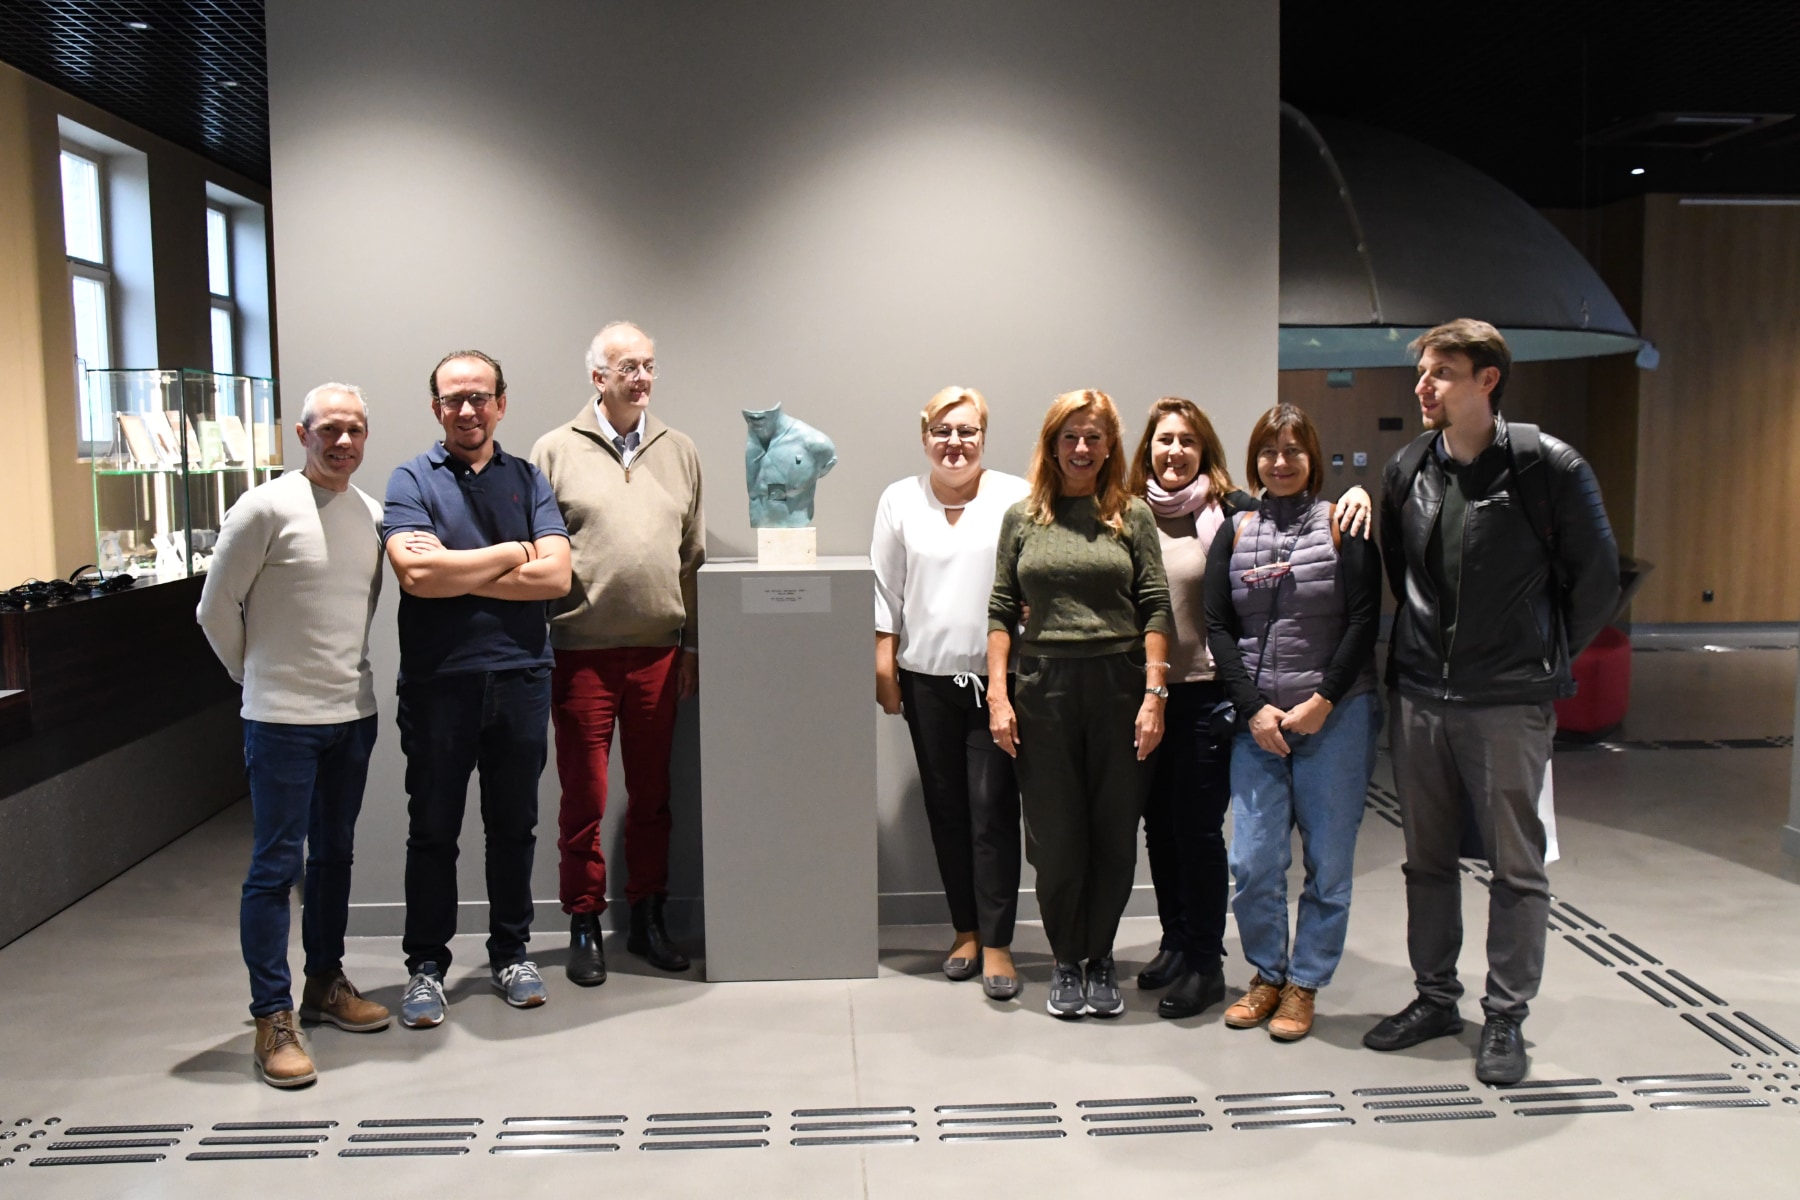 Representatives of the tourism industry from Belgium, Spain and Portugal, who were touring Lesser Poland (Malopolska) visited the Remembrance Museum.